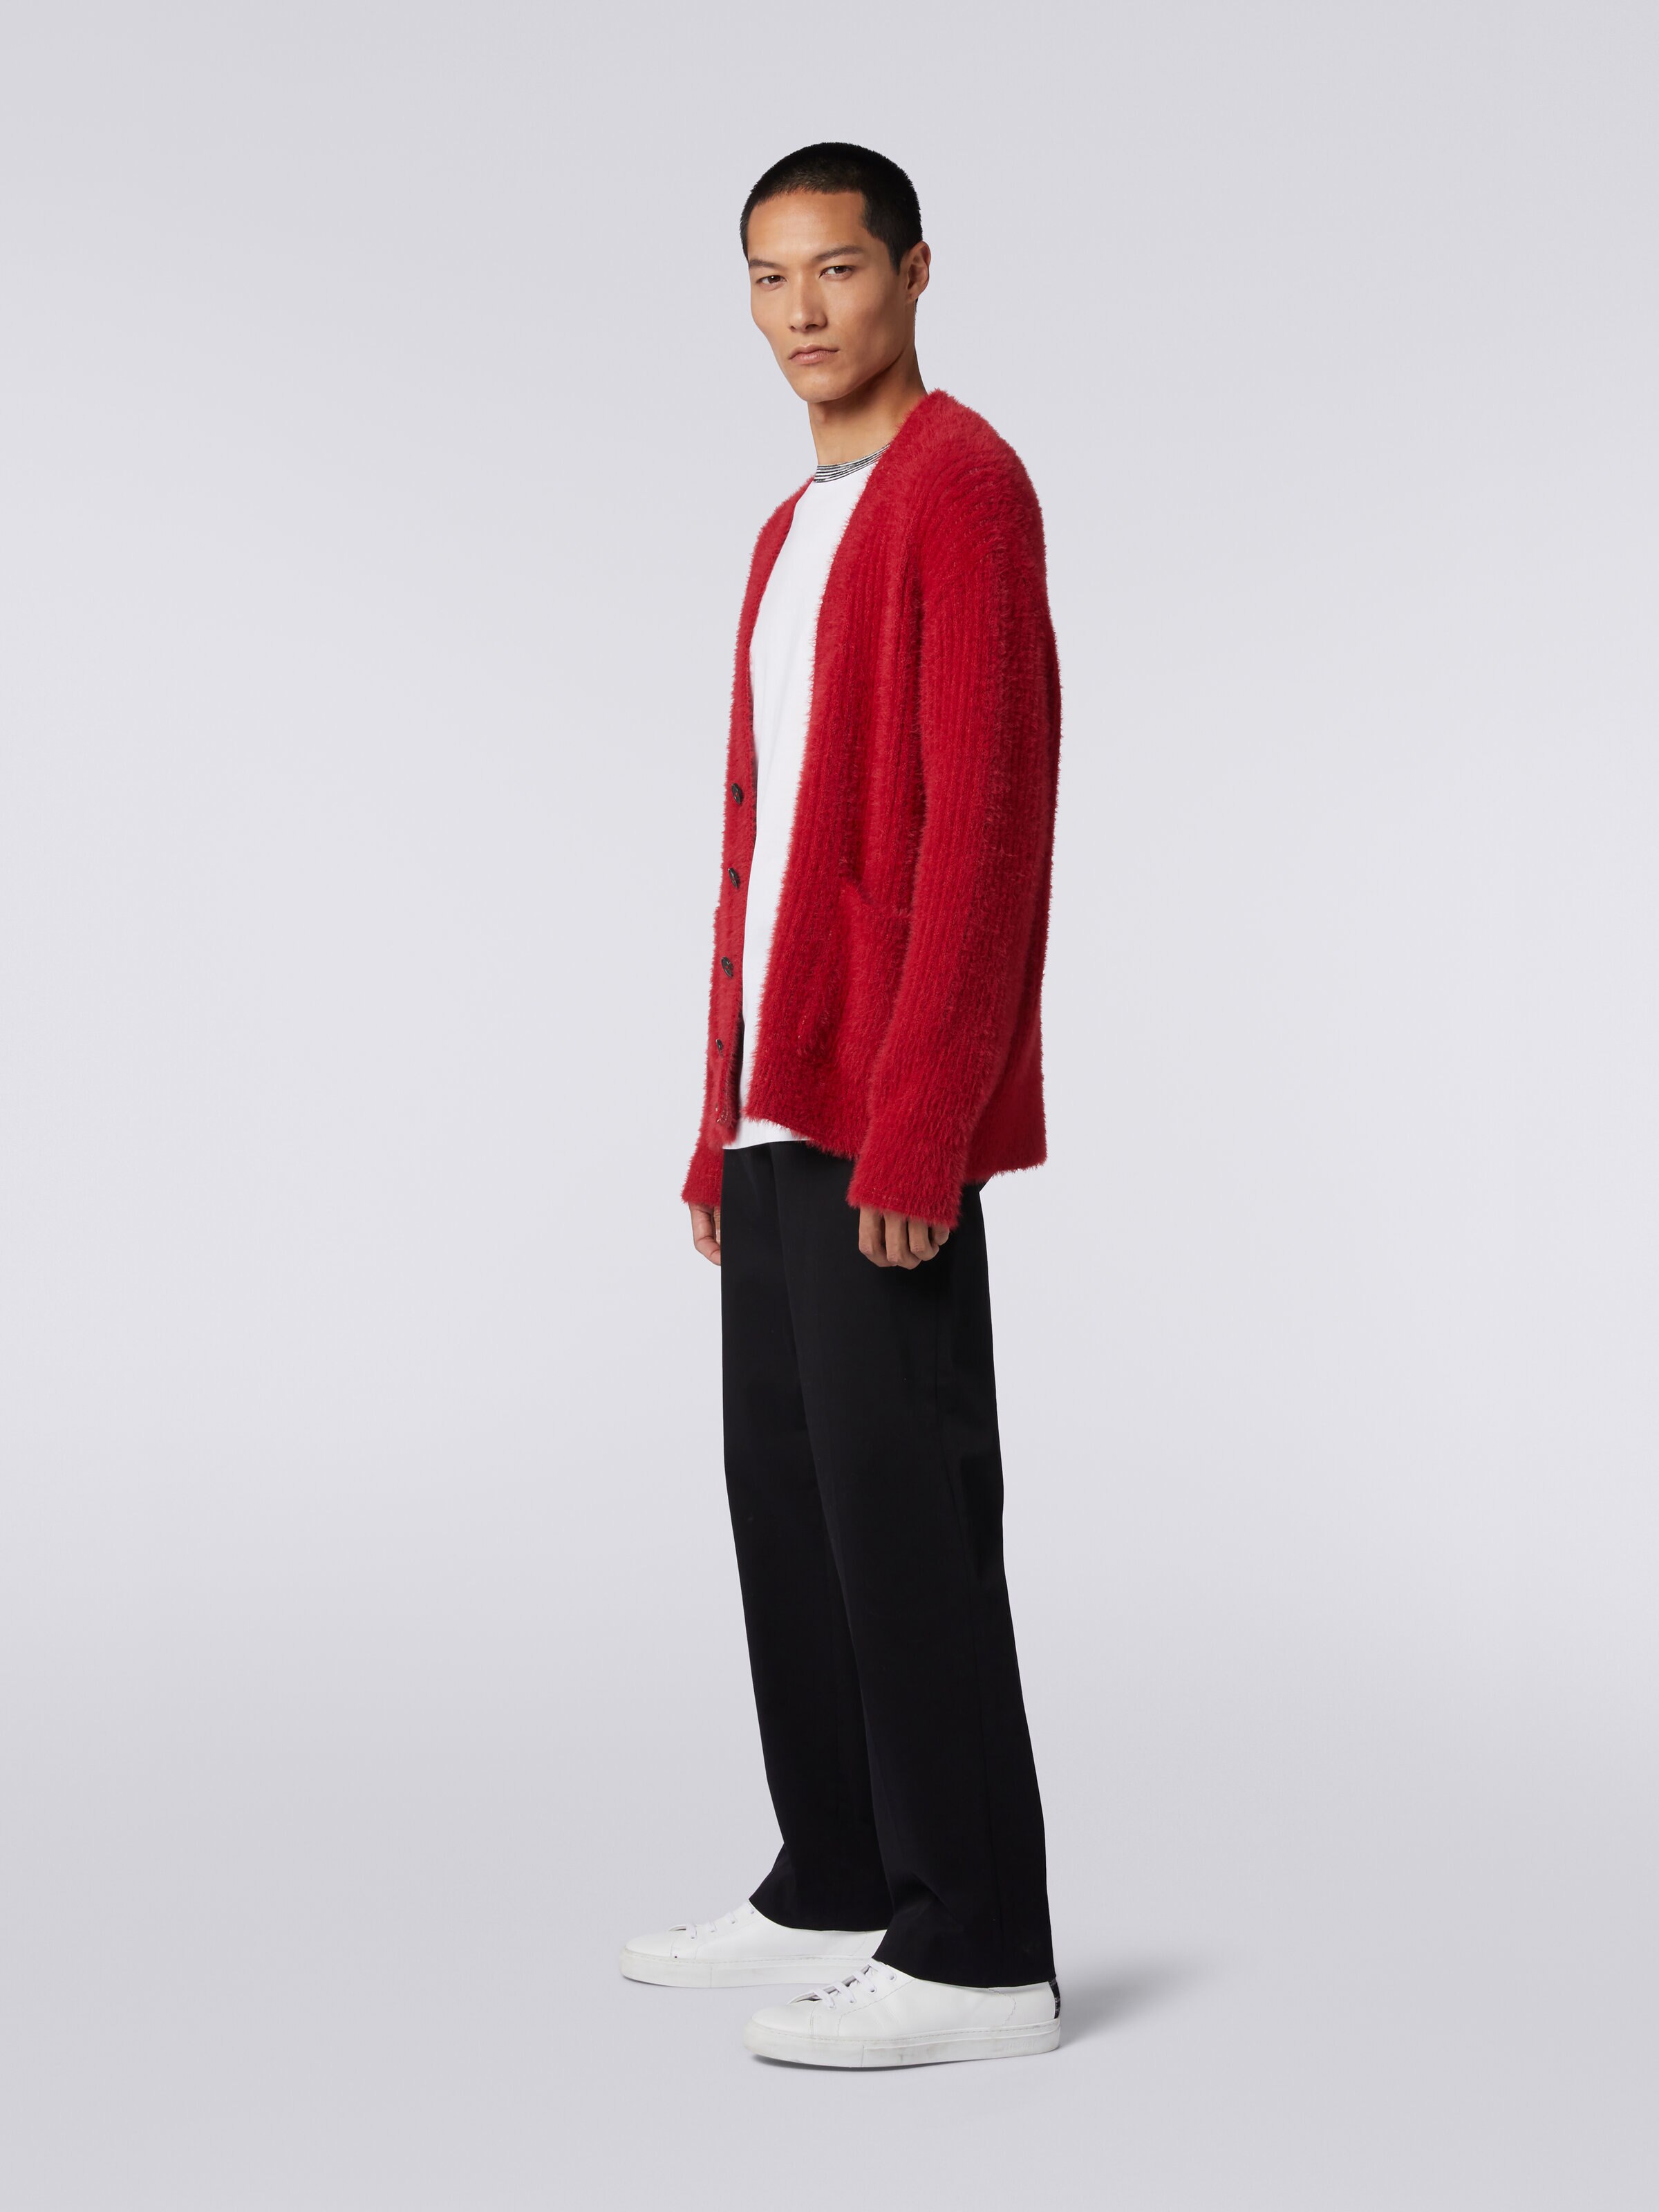 Oversized cardigan in fur-effect wool blend, Red  - 2